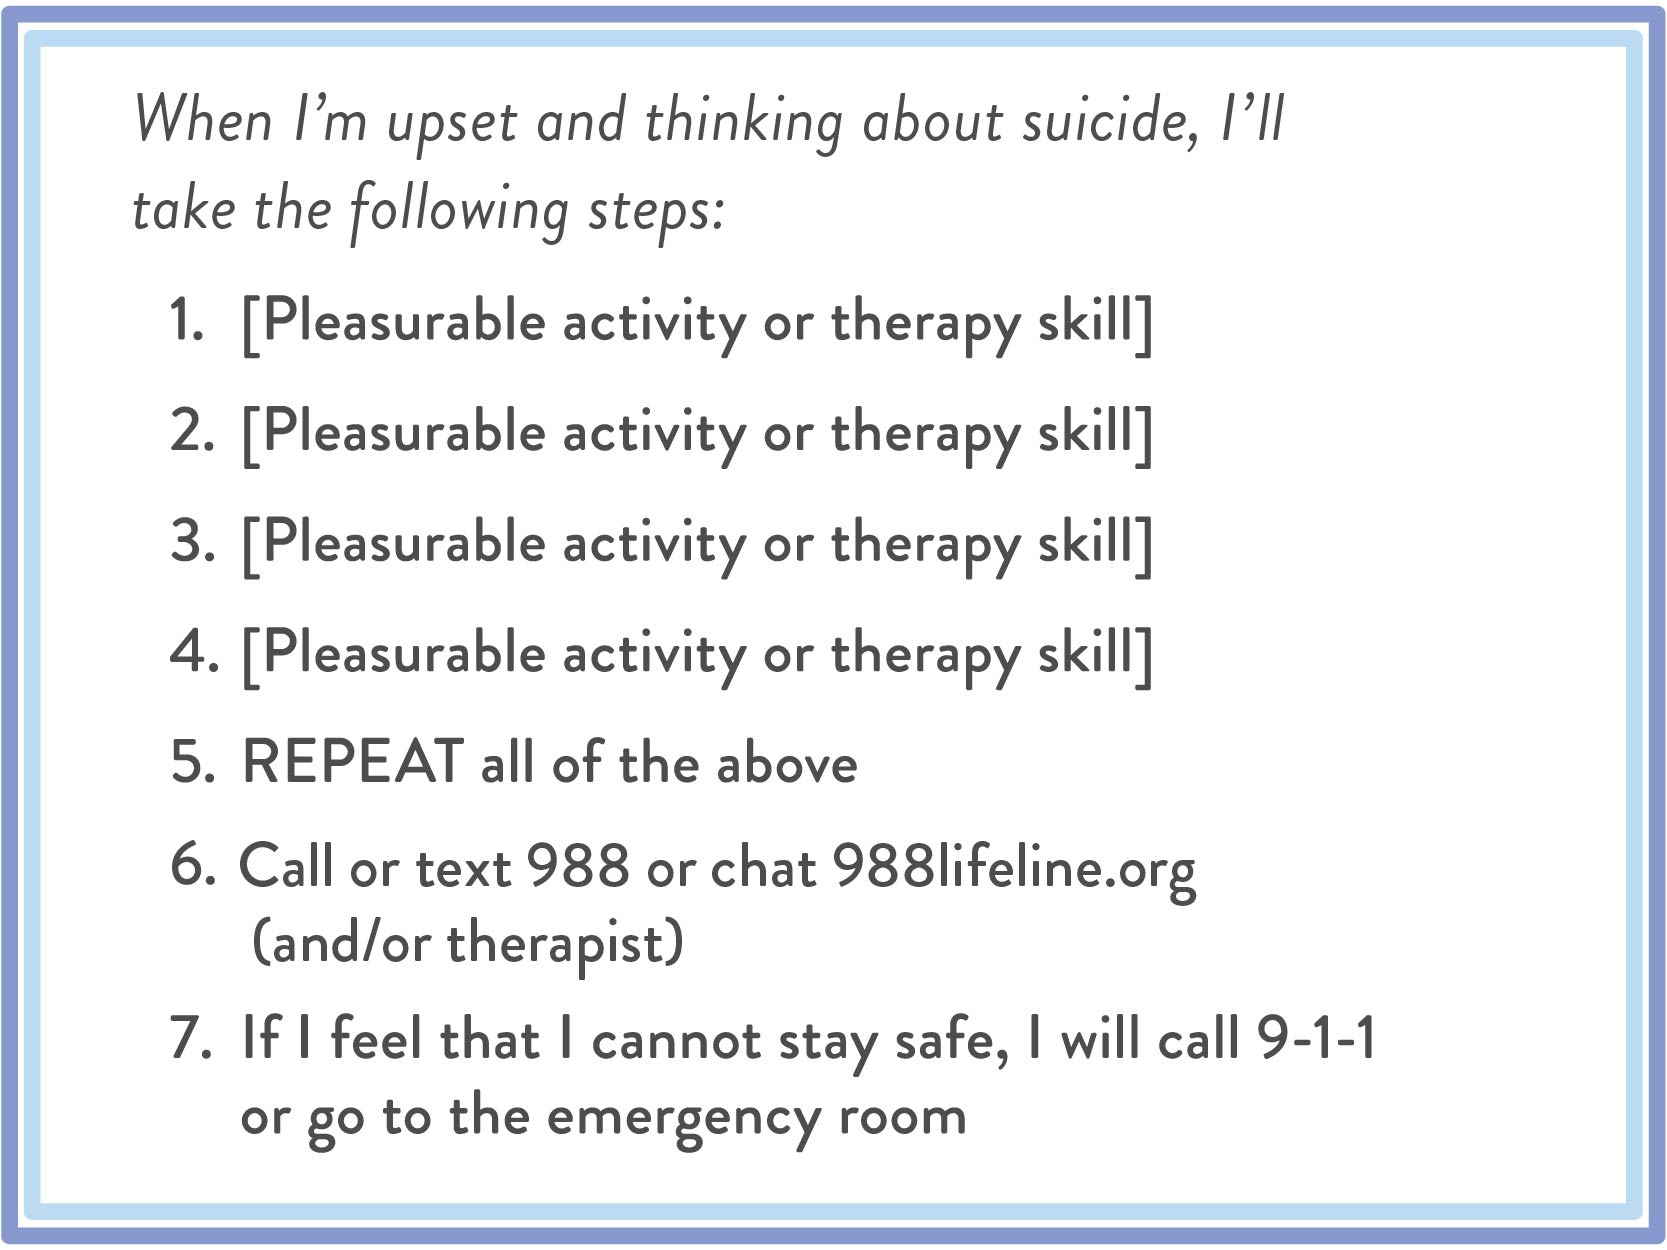 List of steps to follow for suicide prevention